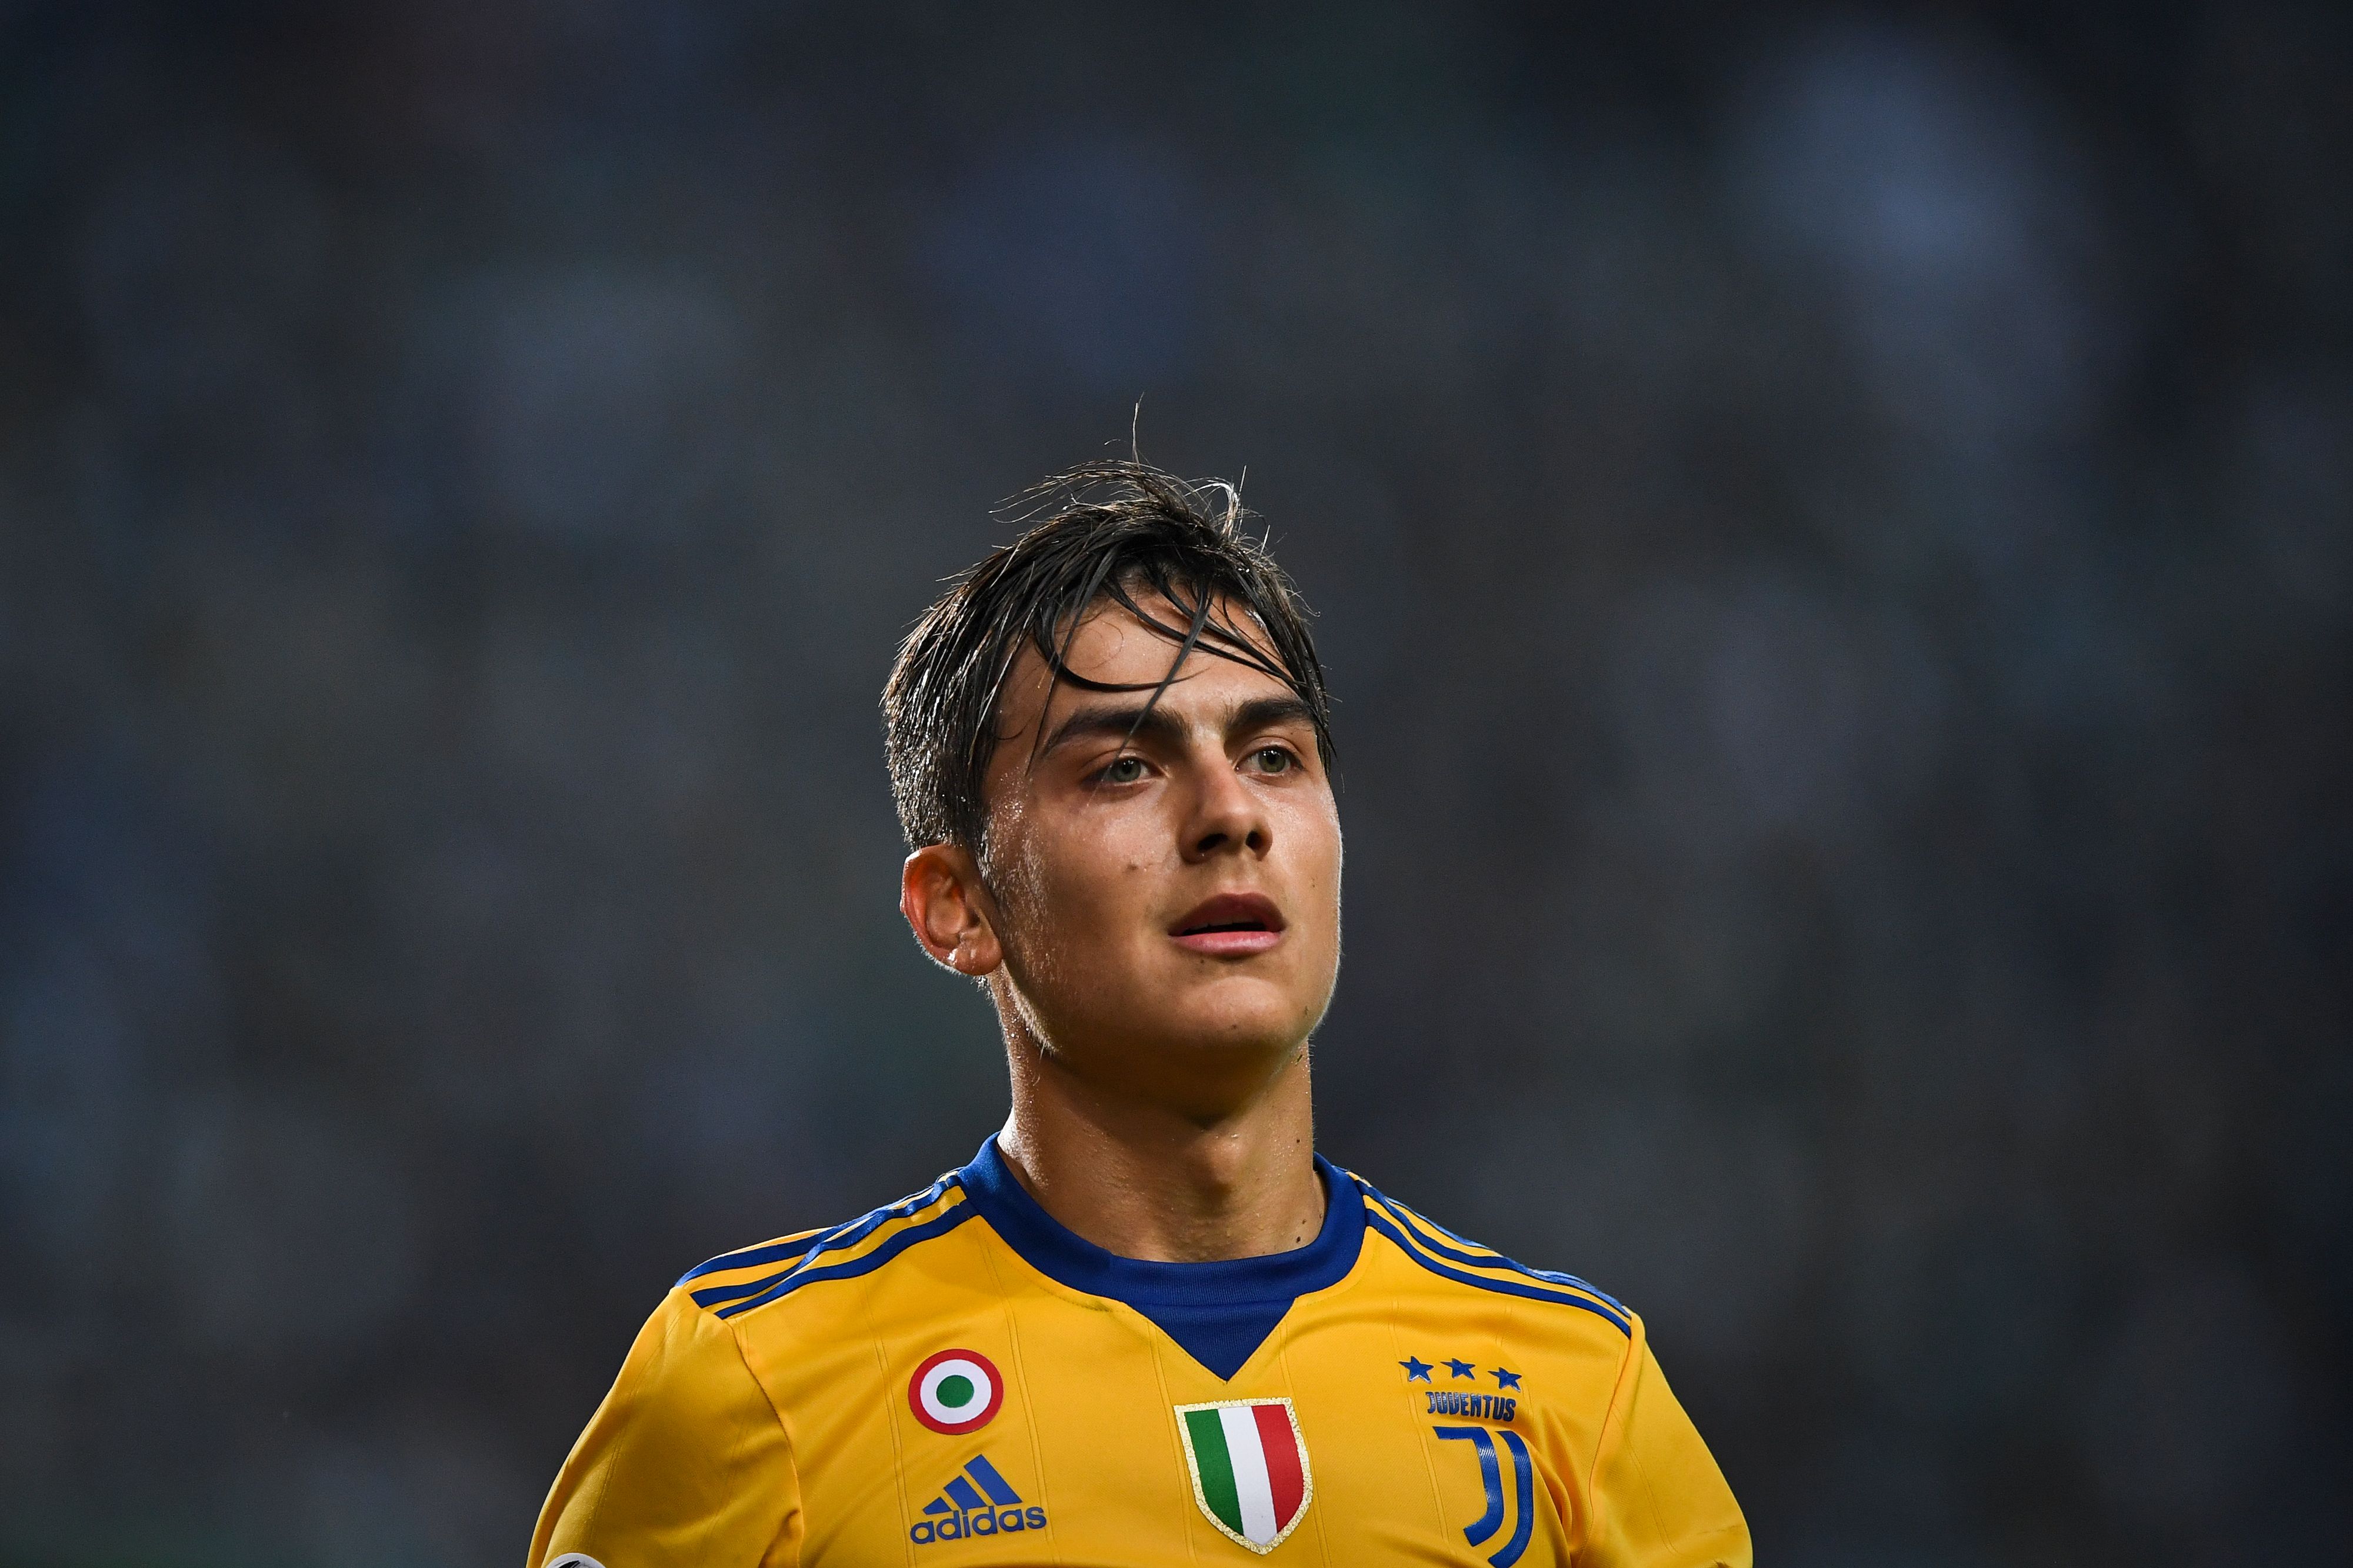 Juventus' Argentinian forward Paulo Dybala looks on during the Champions League, Group D, football match Sporting CP vs Juventus FC at Alvalade stadium in Lisbon on October 31, 2017.  / AFP PHOTO / PATRICIA DE MELO MOREIRA        (Photo credit should read PATRICIA DE MELO MOREIRA/AFP/Getty Images)